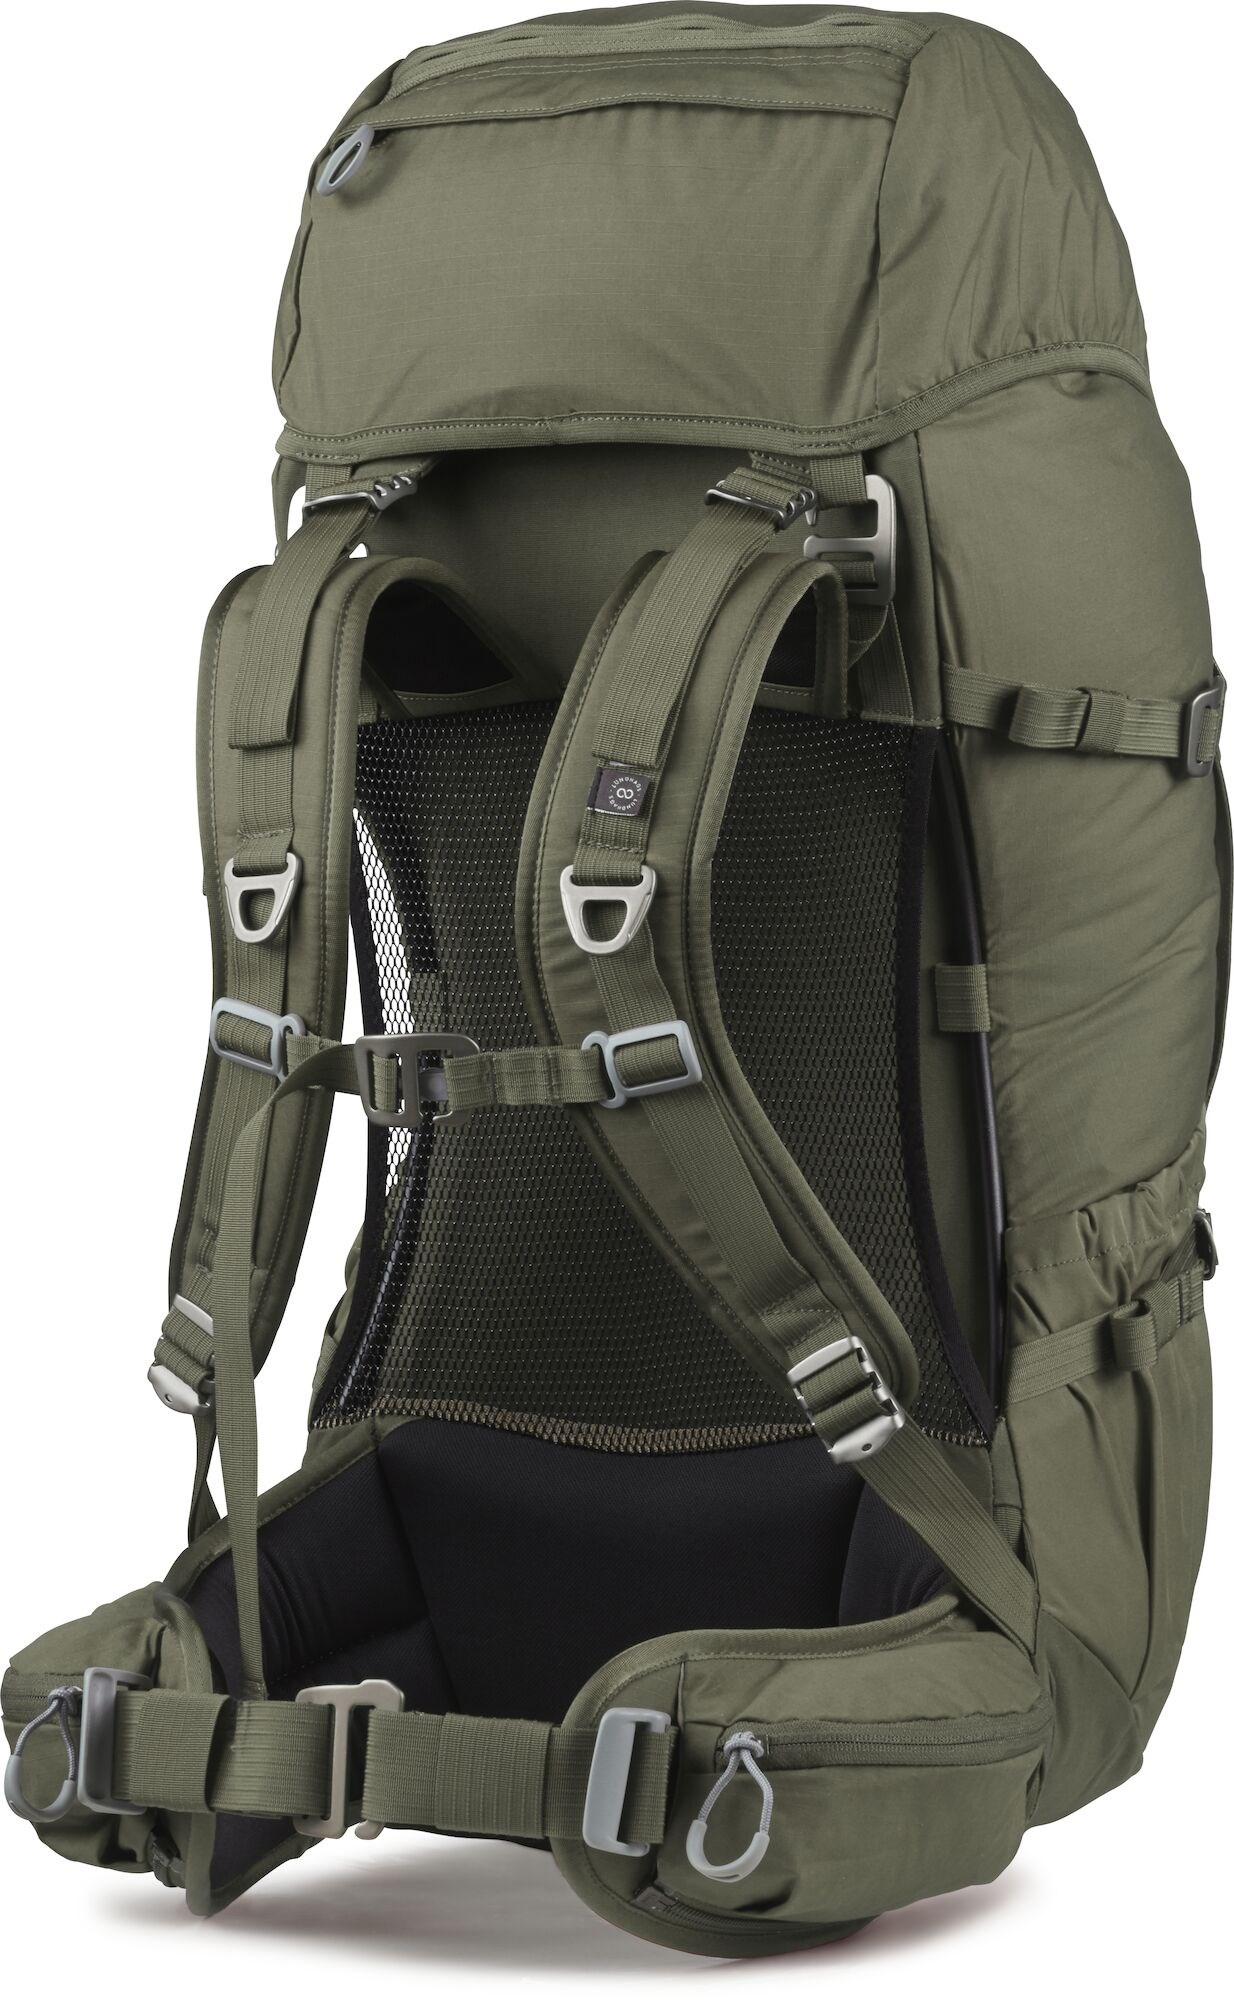 A backpack with straps.